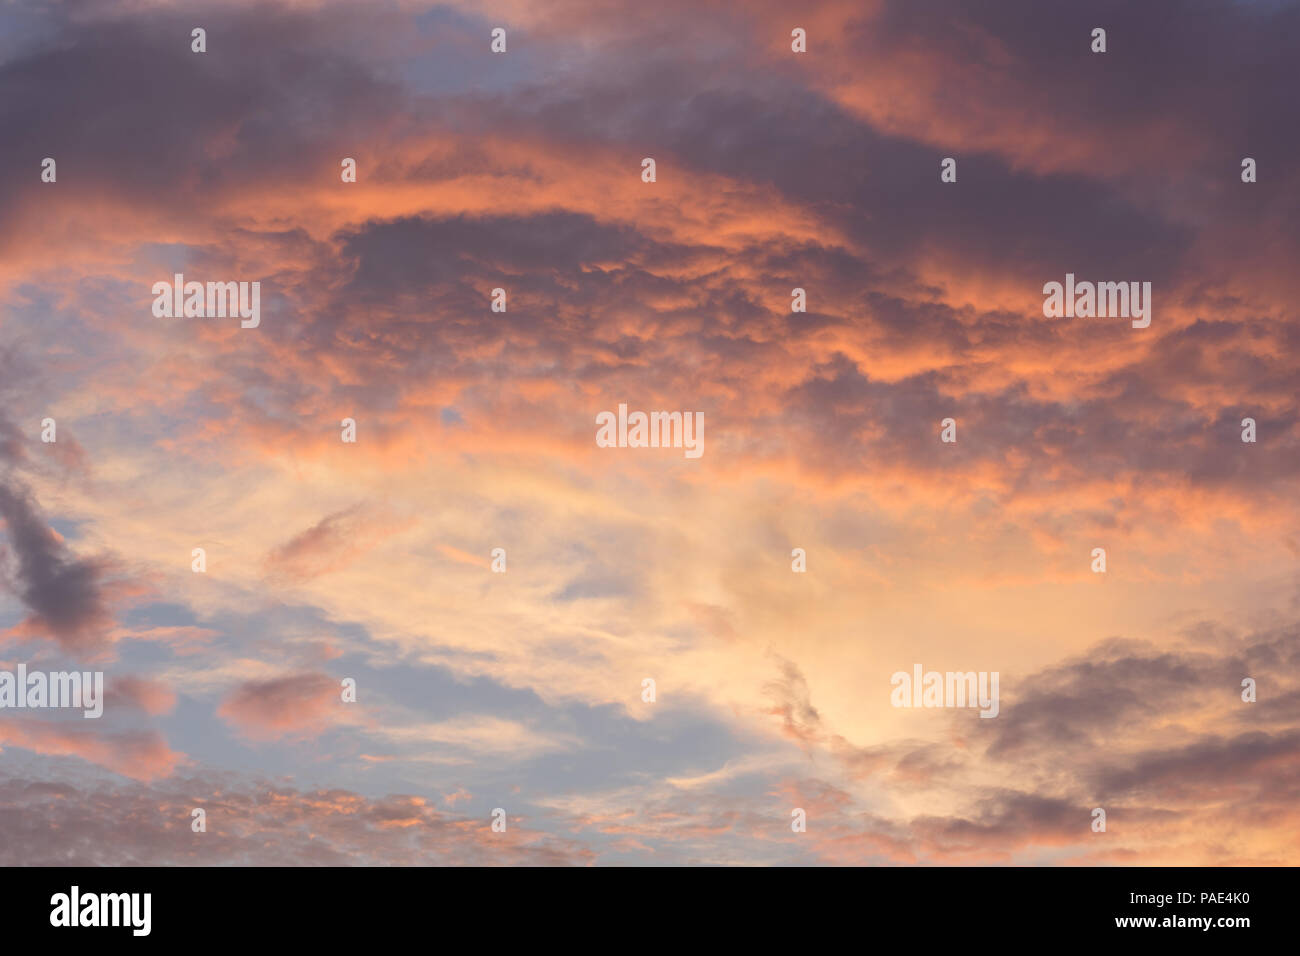 Colorful sunset clouds. Stock Photo